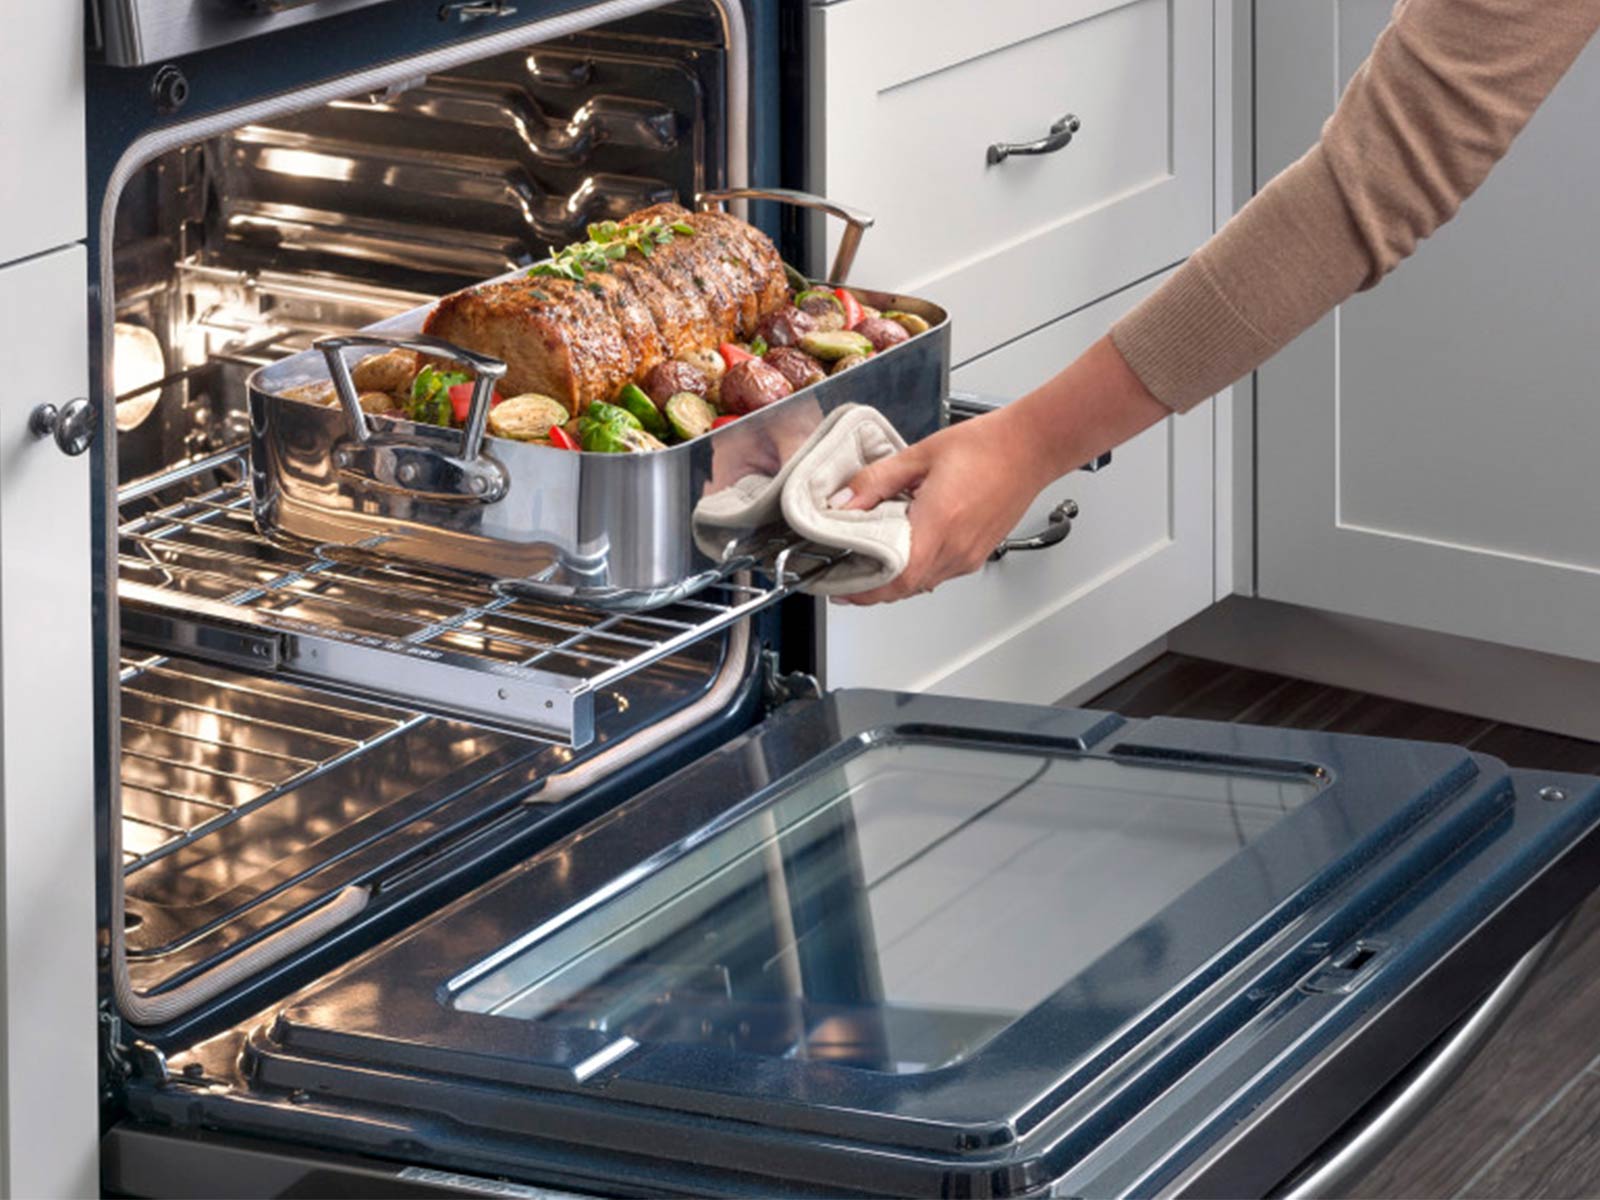 Thumbnail image of 5.8 cu. ft. Chef Collection Slide-in Gas Range with True Convection in Stainless Steel